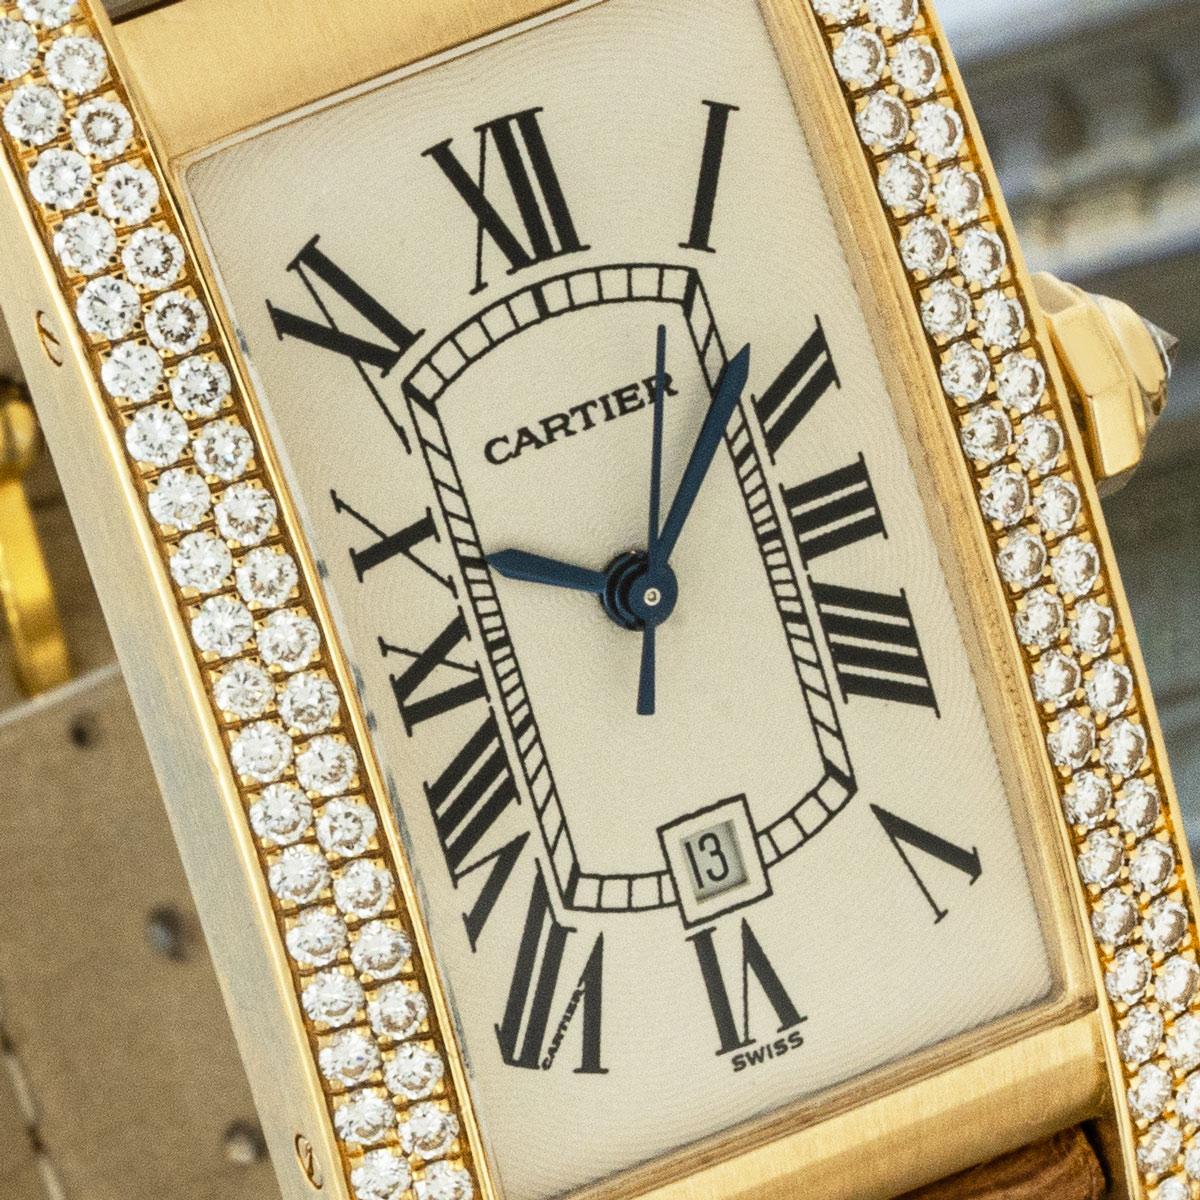 A yellow gold Tank Americaine by Cartier. Features a silver dial with Roman numerals, date display, sword-shaped hands in blued steel and a secret Cartier signature at V of VII. The piece is complemented by approximately 102 round brilliant cut